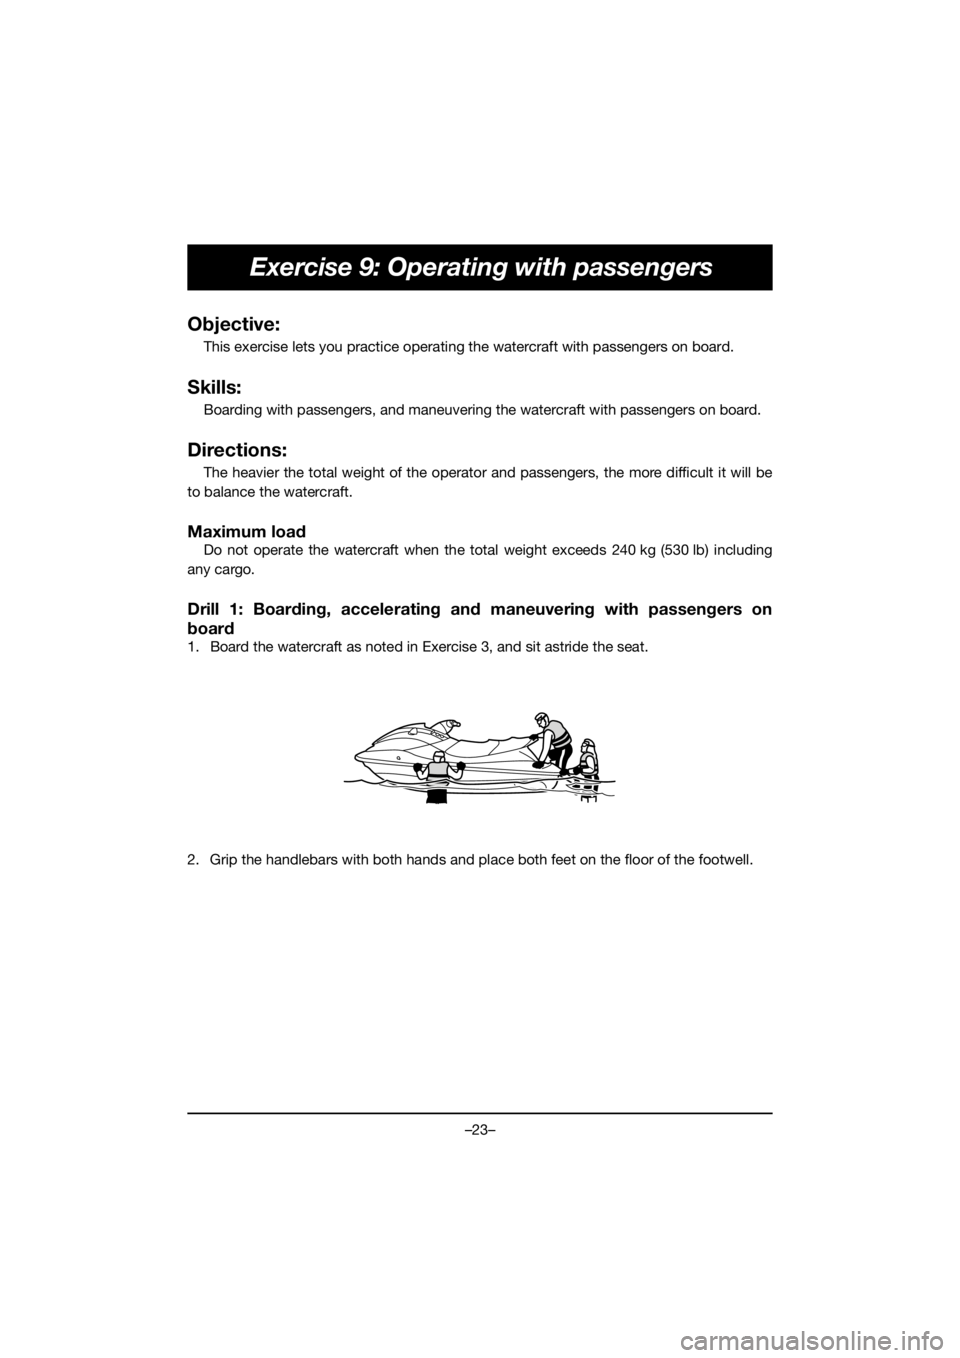 YAMAHA VX-C 2021  Manuale de Empleo (in Spanish) –23–
Exercise 9: Operating with passengers
Objective:
This exercise lets you practice operating the watercraft with passengers on board.
Skills:
Boarding with passengers, and maneuvering the water